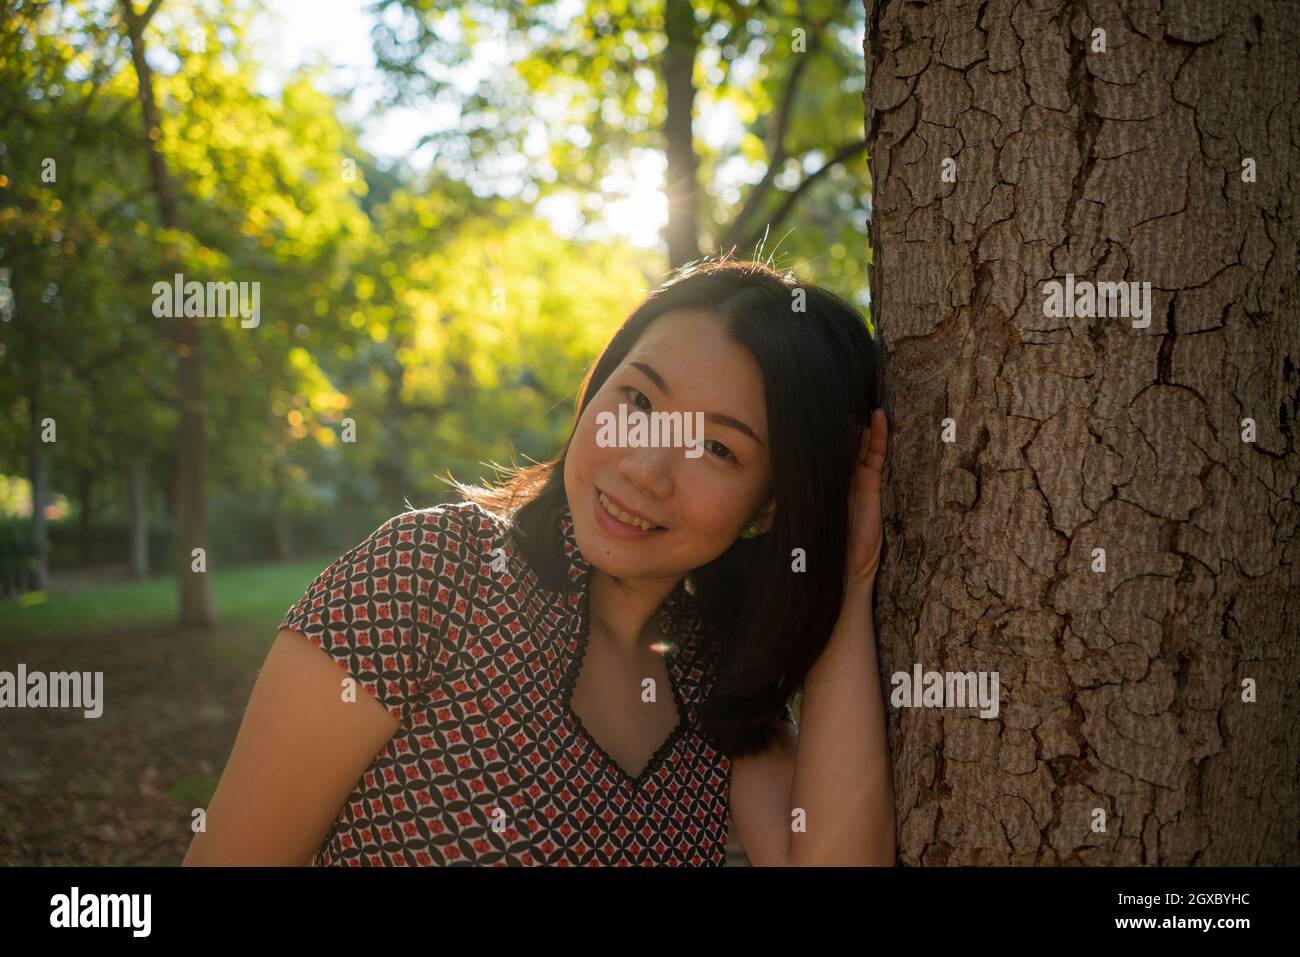 outdoors lifestyle portrait of young happy and beautiful Asian Korean woman enjoying relaxed and cheerful at city park in Autumn full of tree leaves o Stock Photo